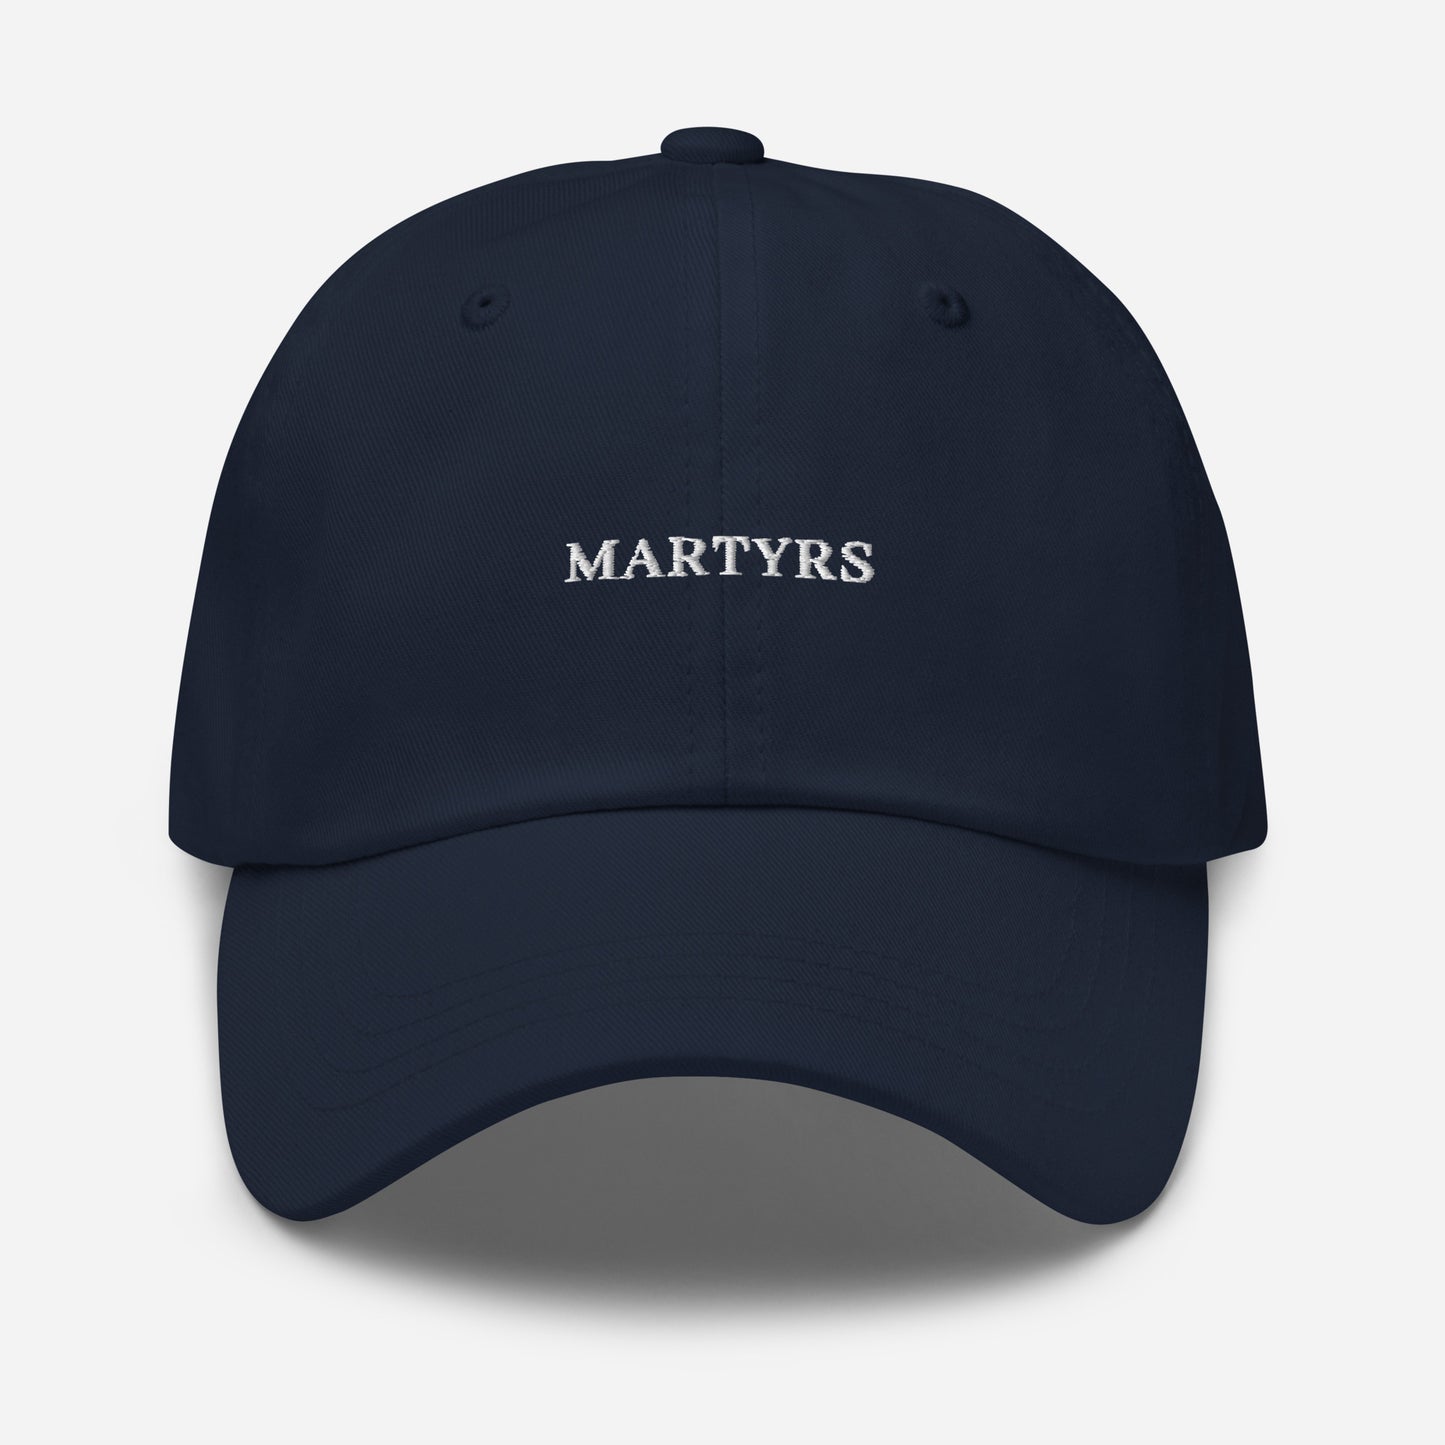 Martyrs - NAVY Classic Dad hat - WHITE FONT broderie